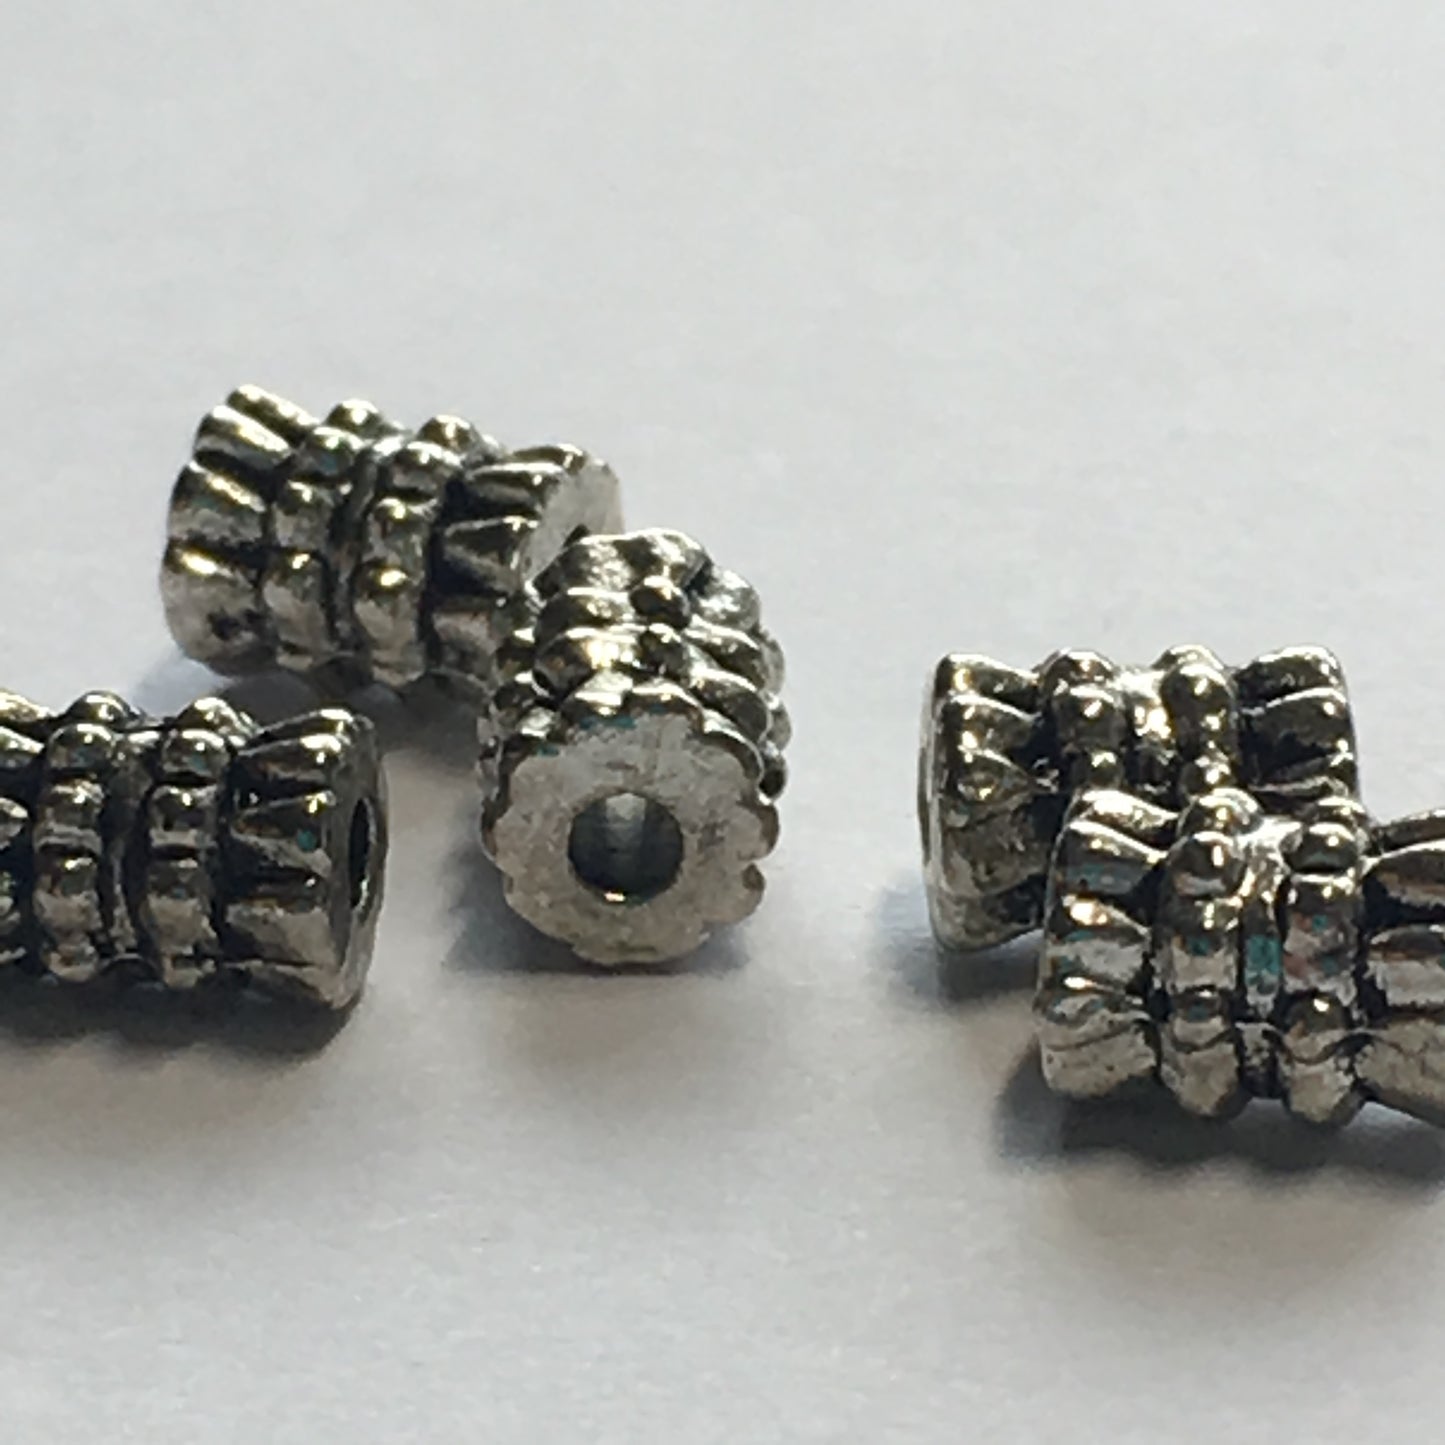 Antique Silver Corrugated Tube Beads, 6 x 4 mm - 5 or 10 Beads